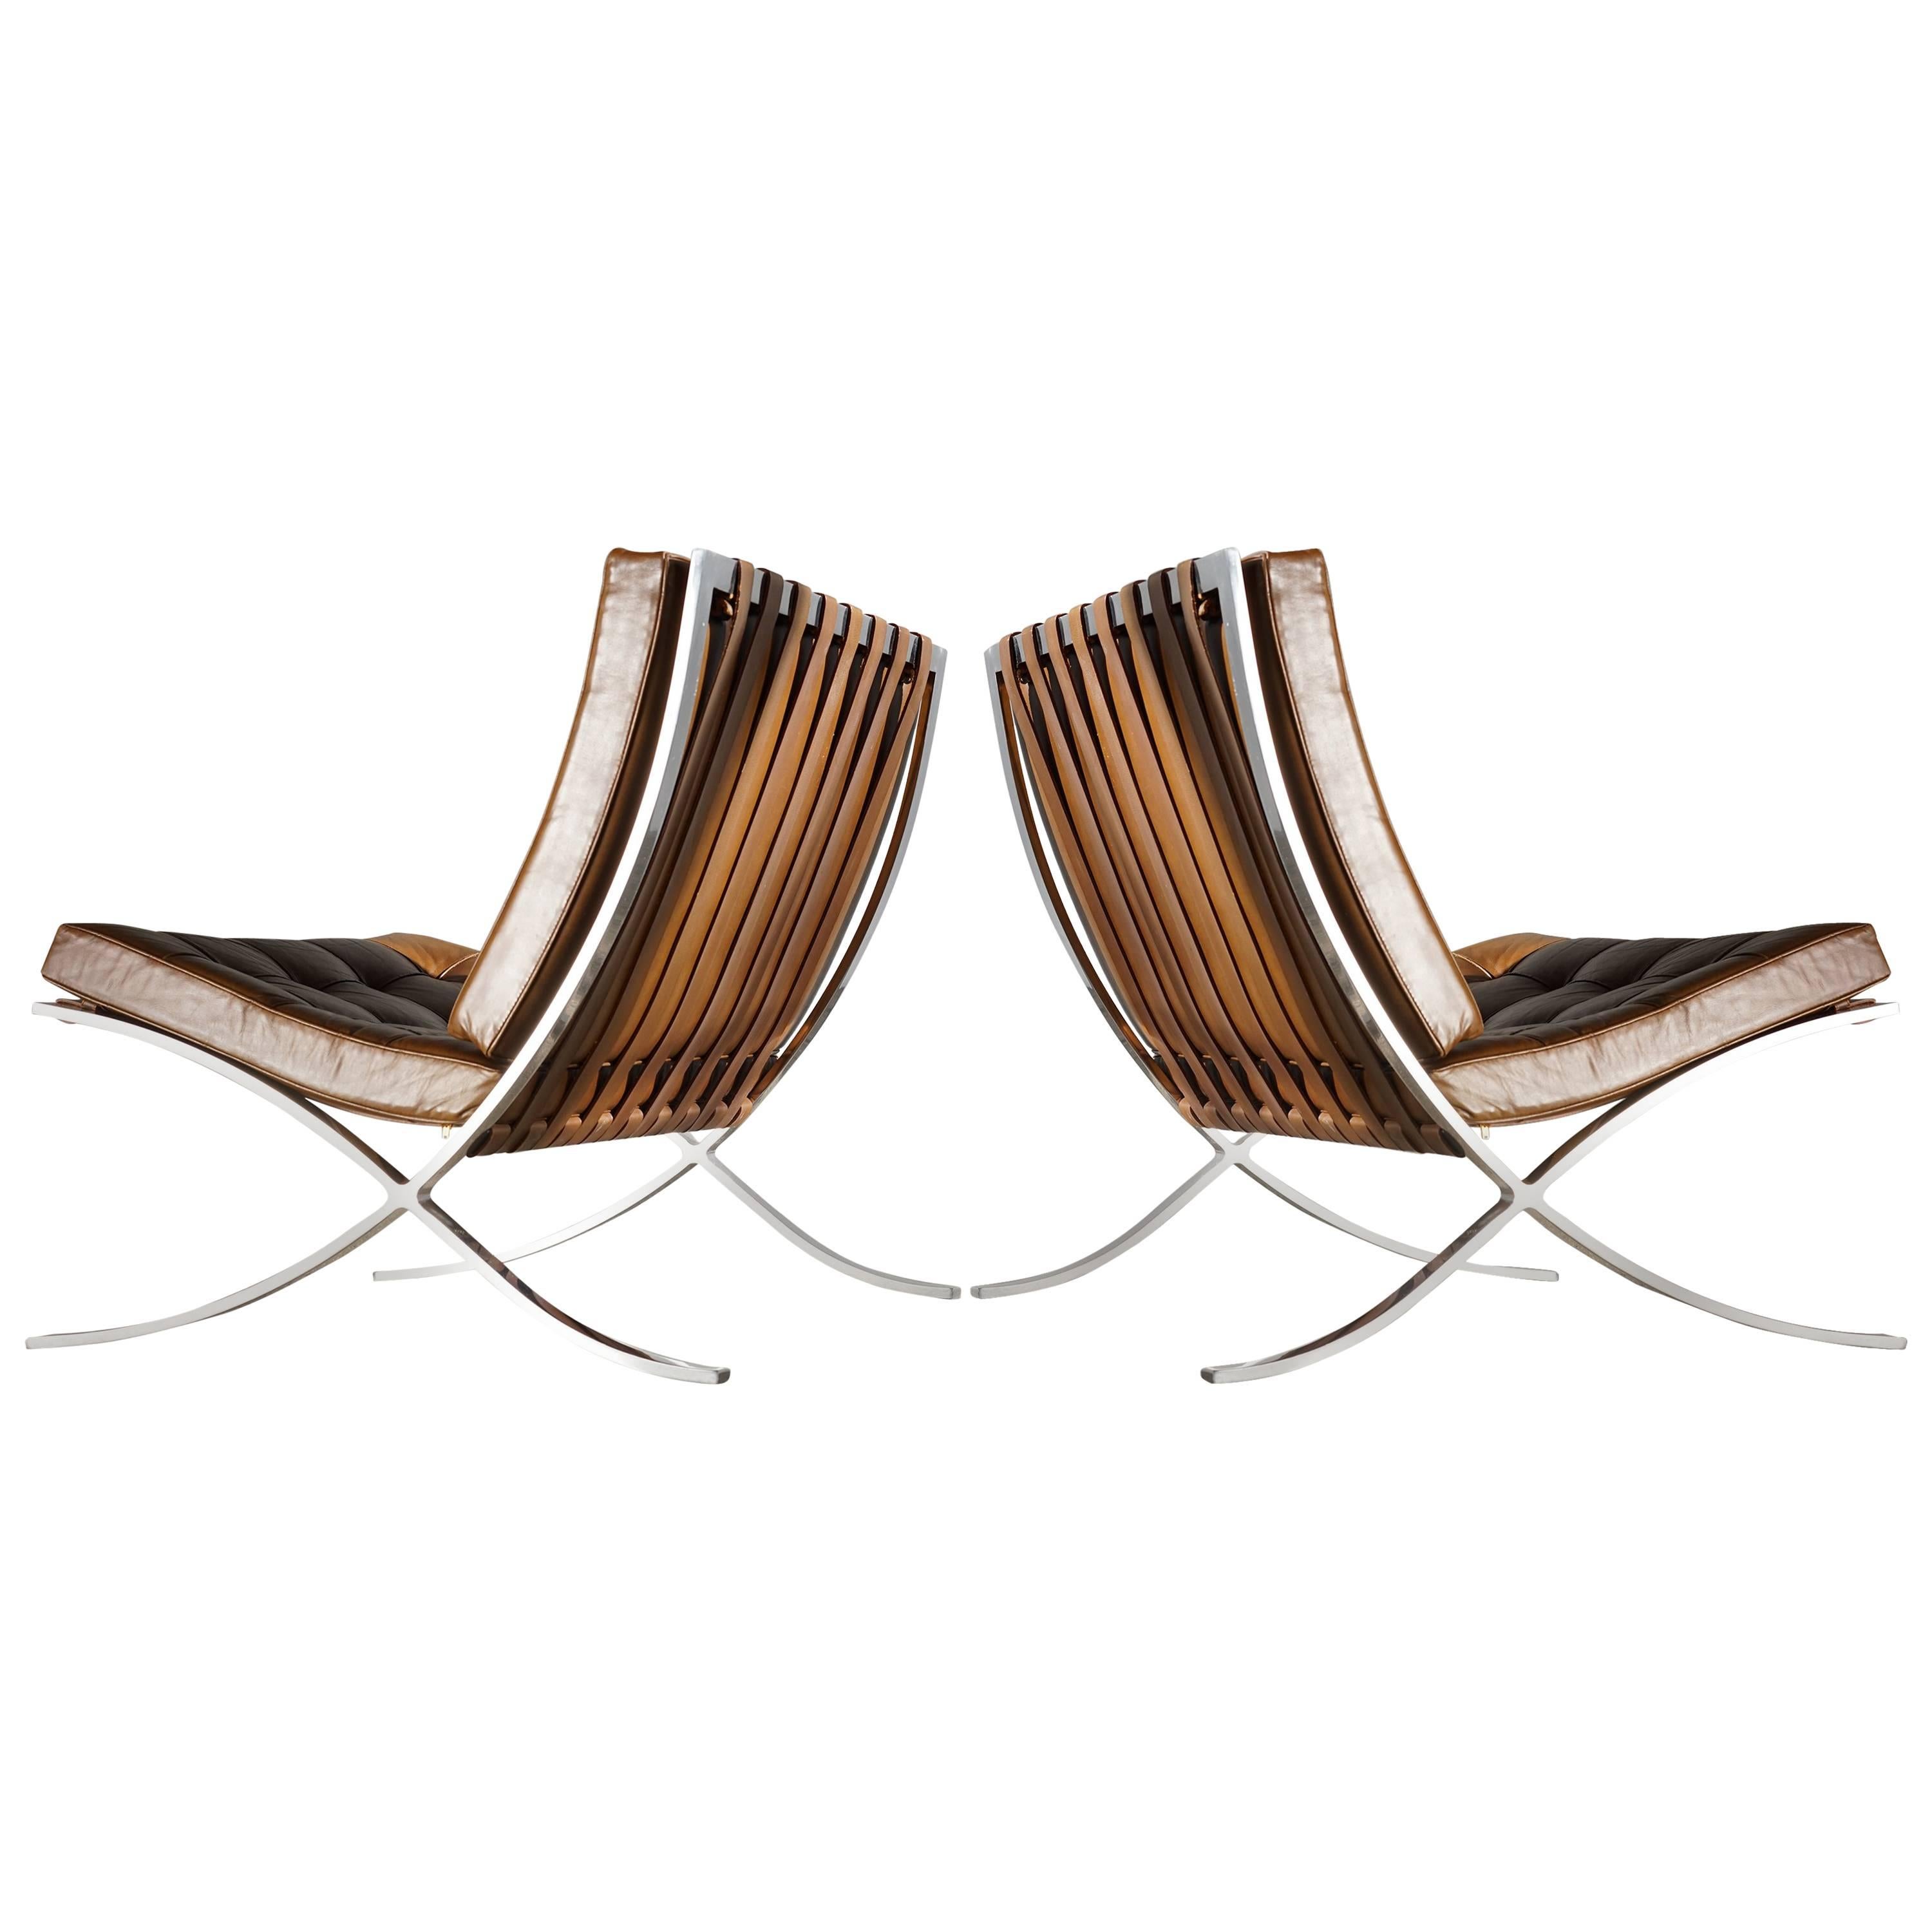 Barcelona Chairs by Mies Van Der Rohe for Knoll